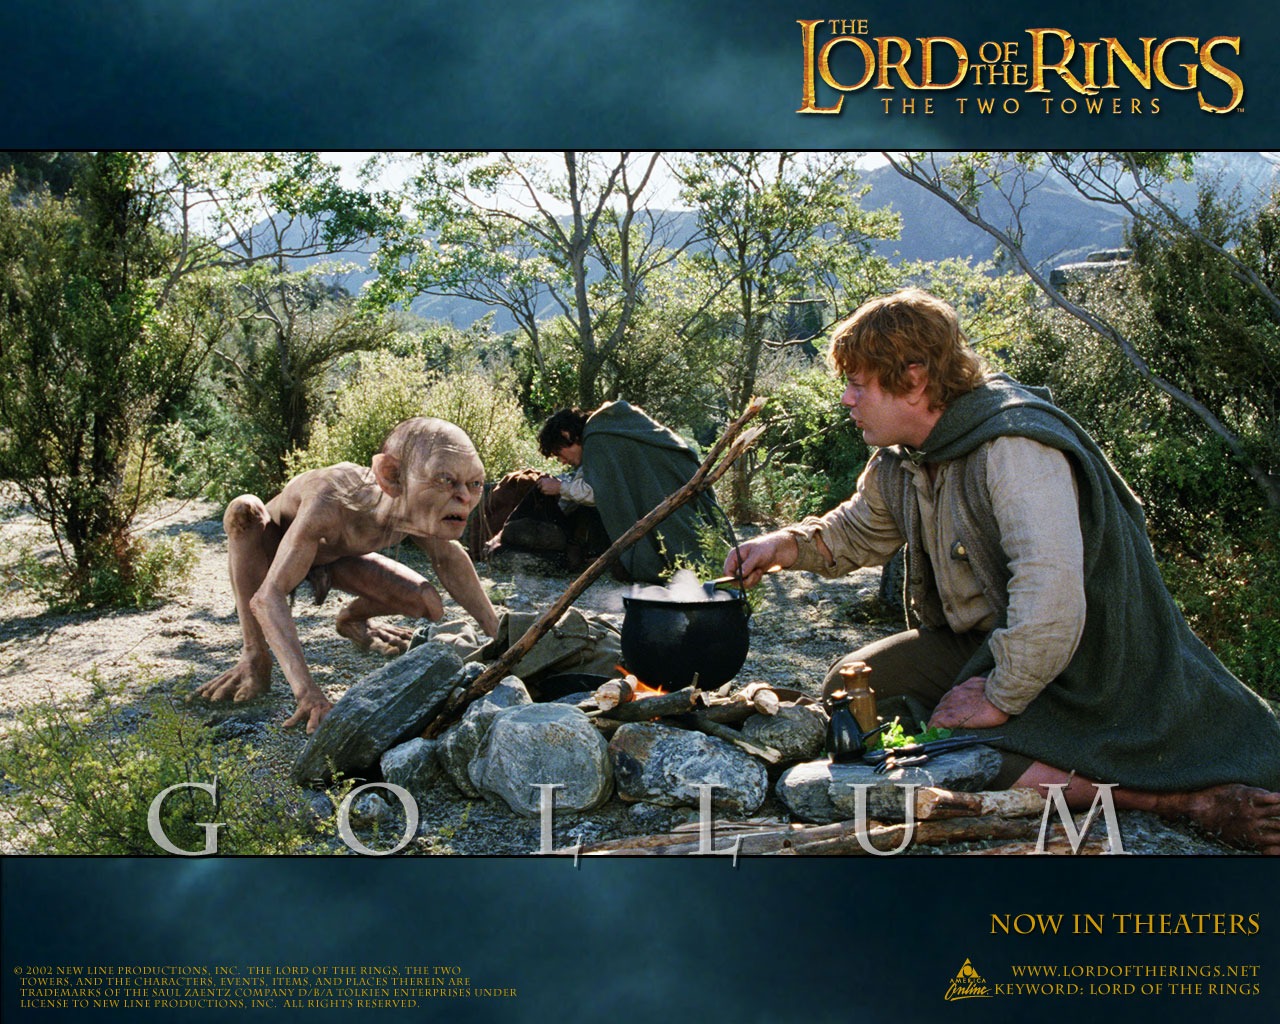 The Lord of the Rings wallpaper #9 - 1280x1024